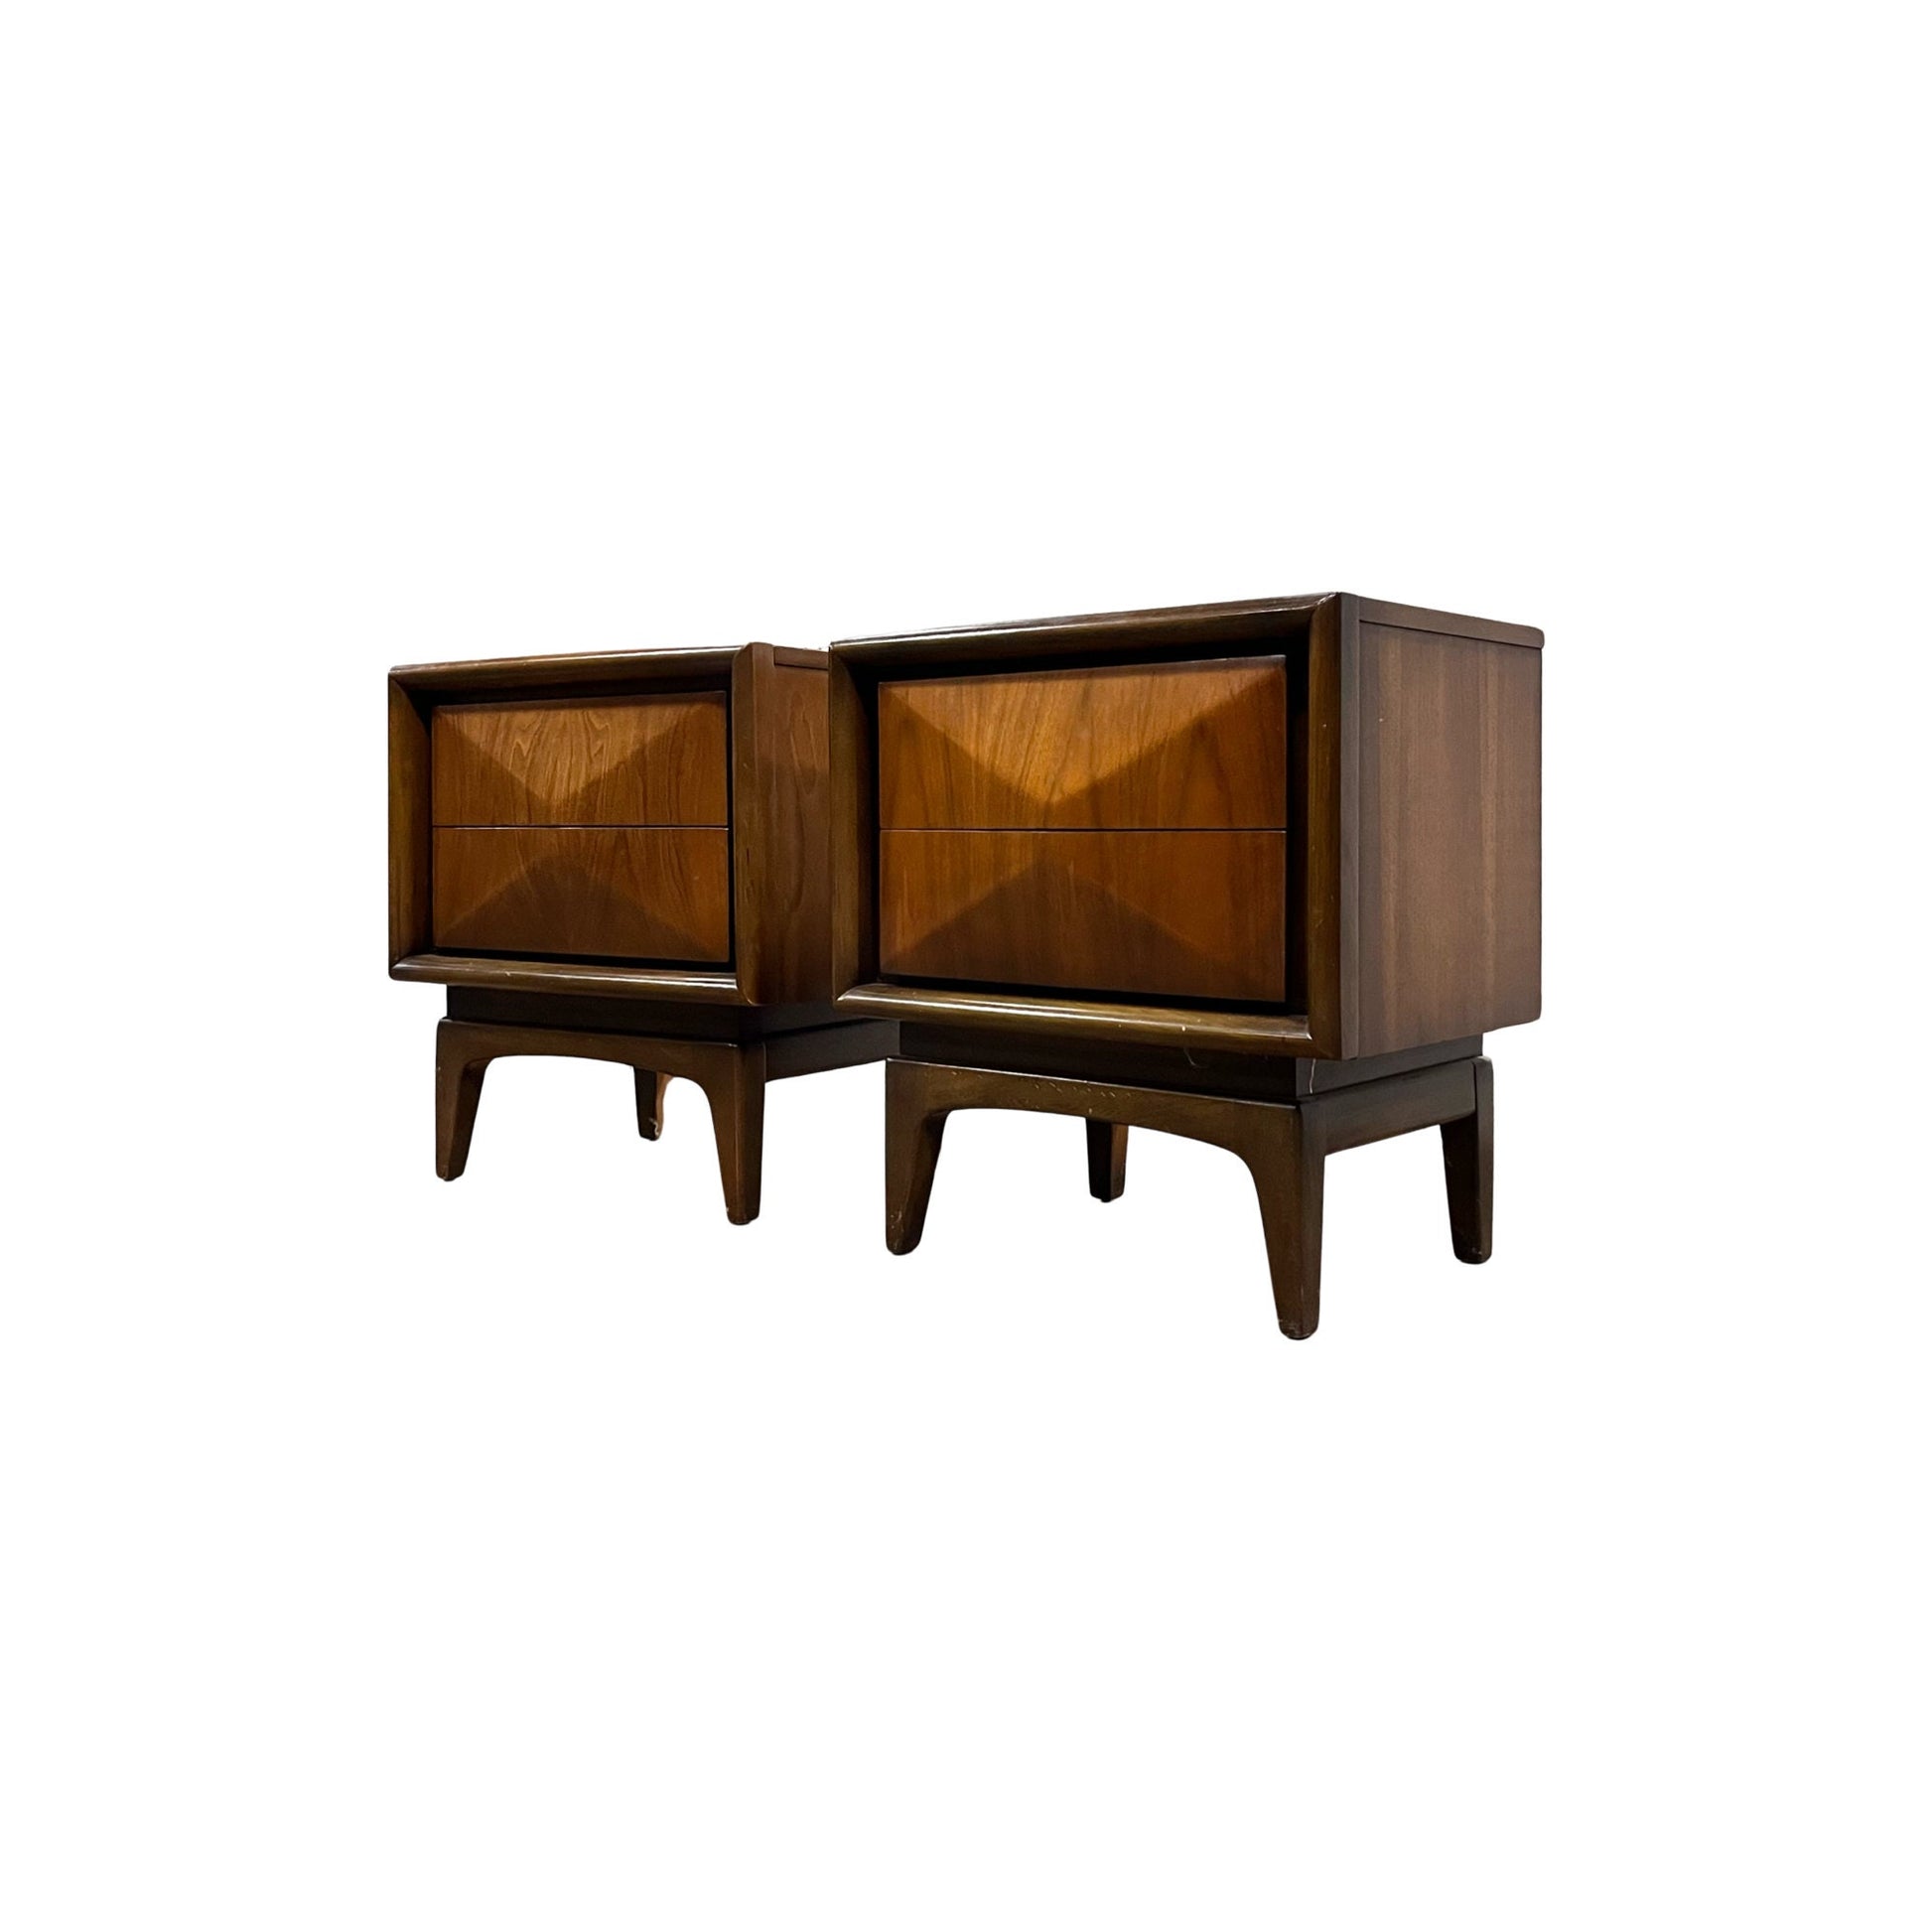 Thick Diamond-Shaped Wood Facades on Drawers - United Furniture Vintage Mid Century Modern Nightstands